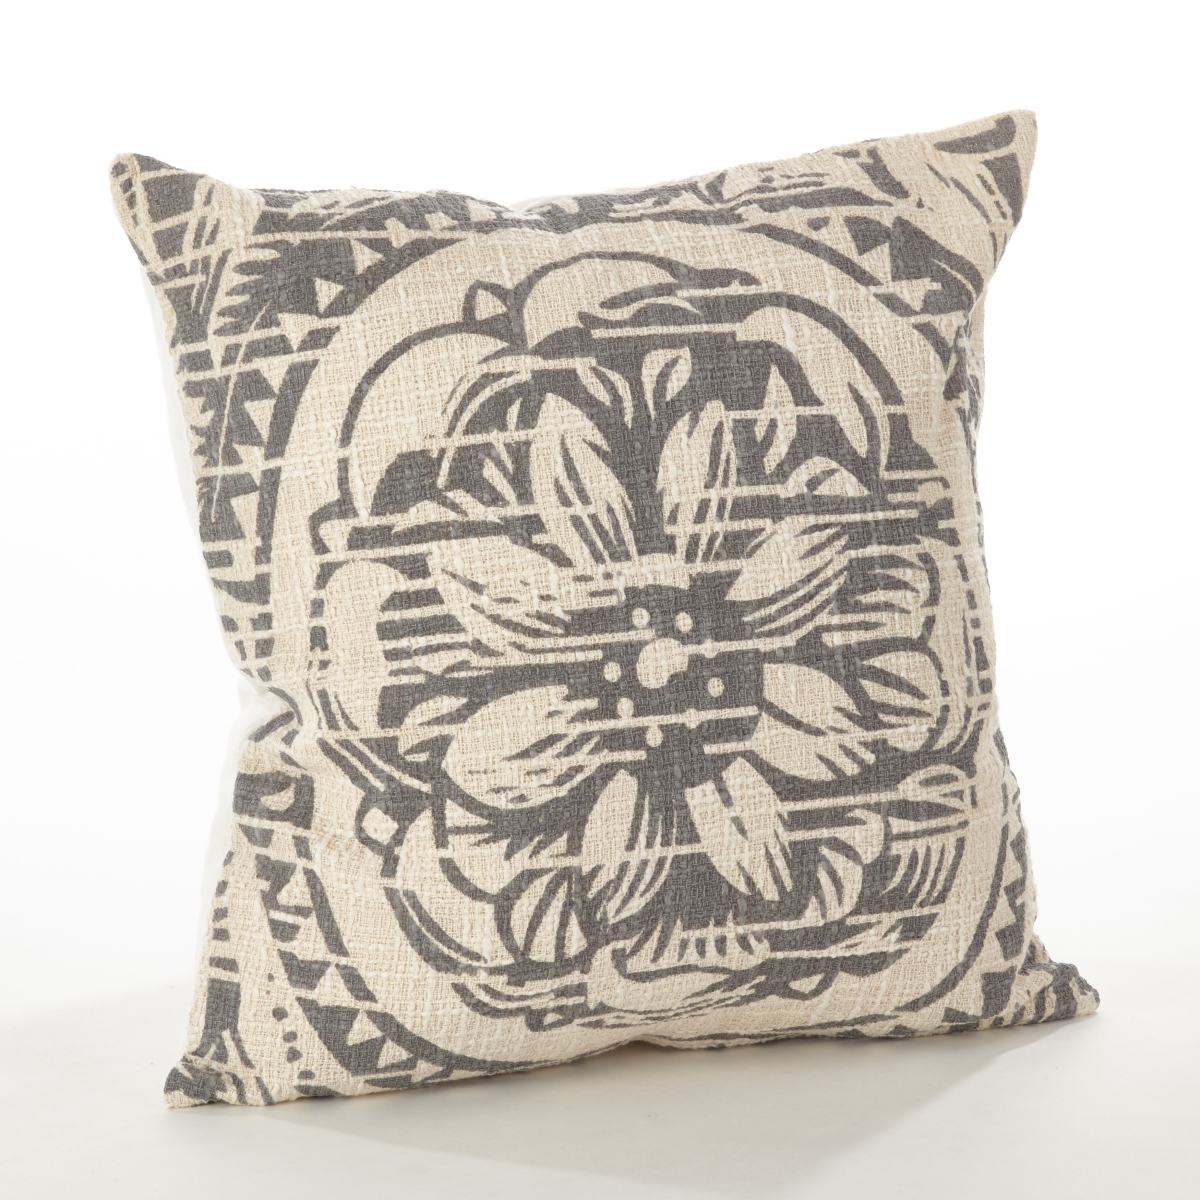 0008.gy20s 20 In. Floral Distressed Design Down Filled Cotton Throw Pillow, Grey